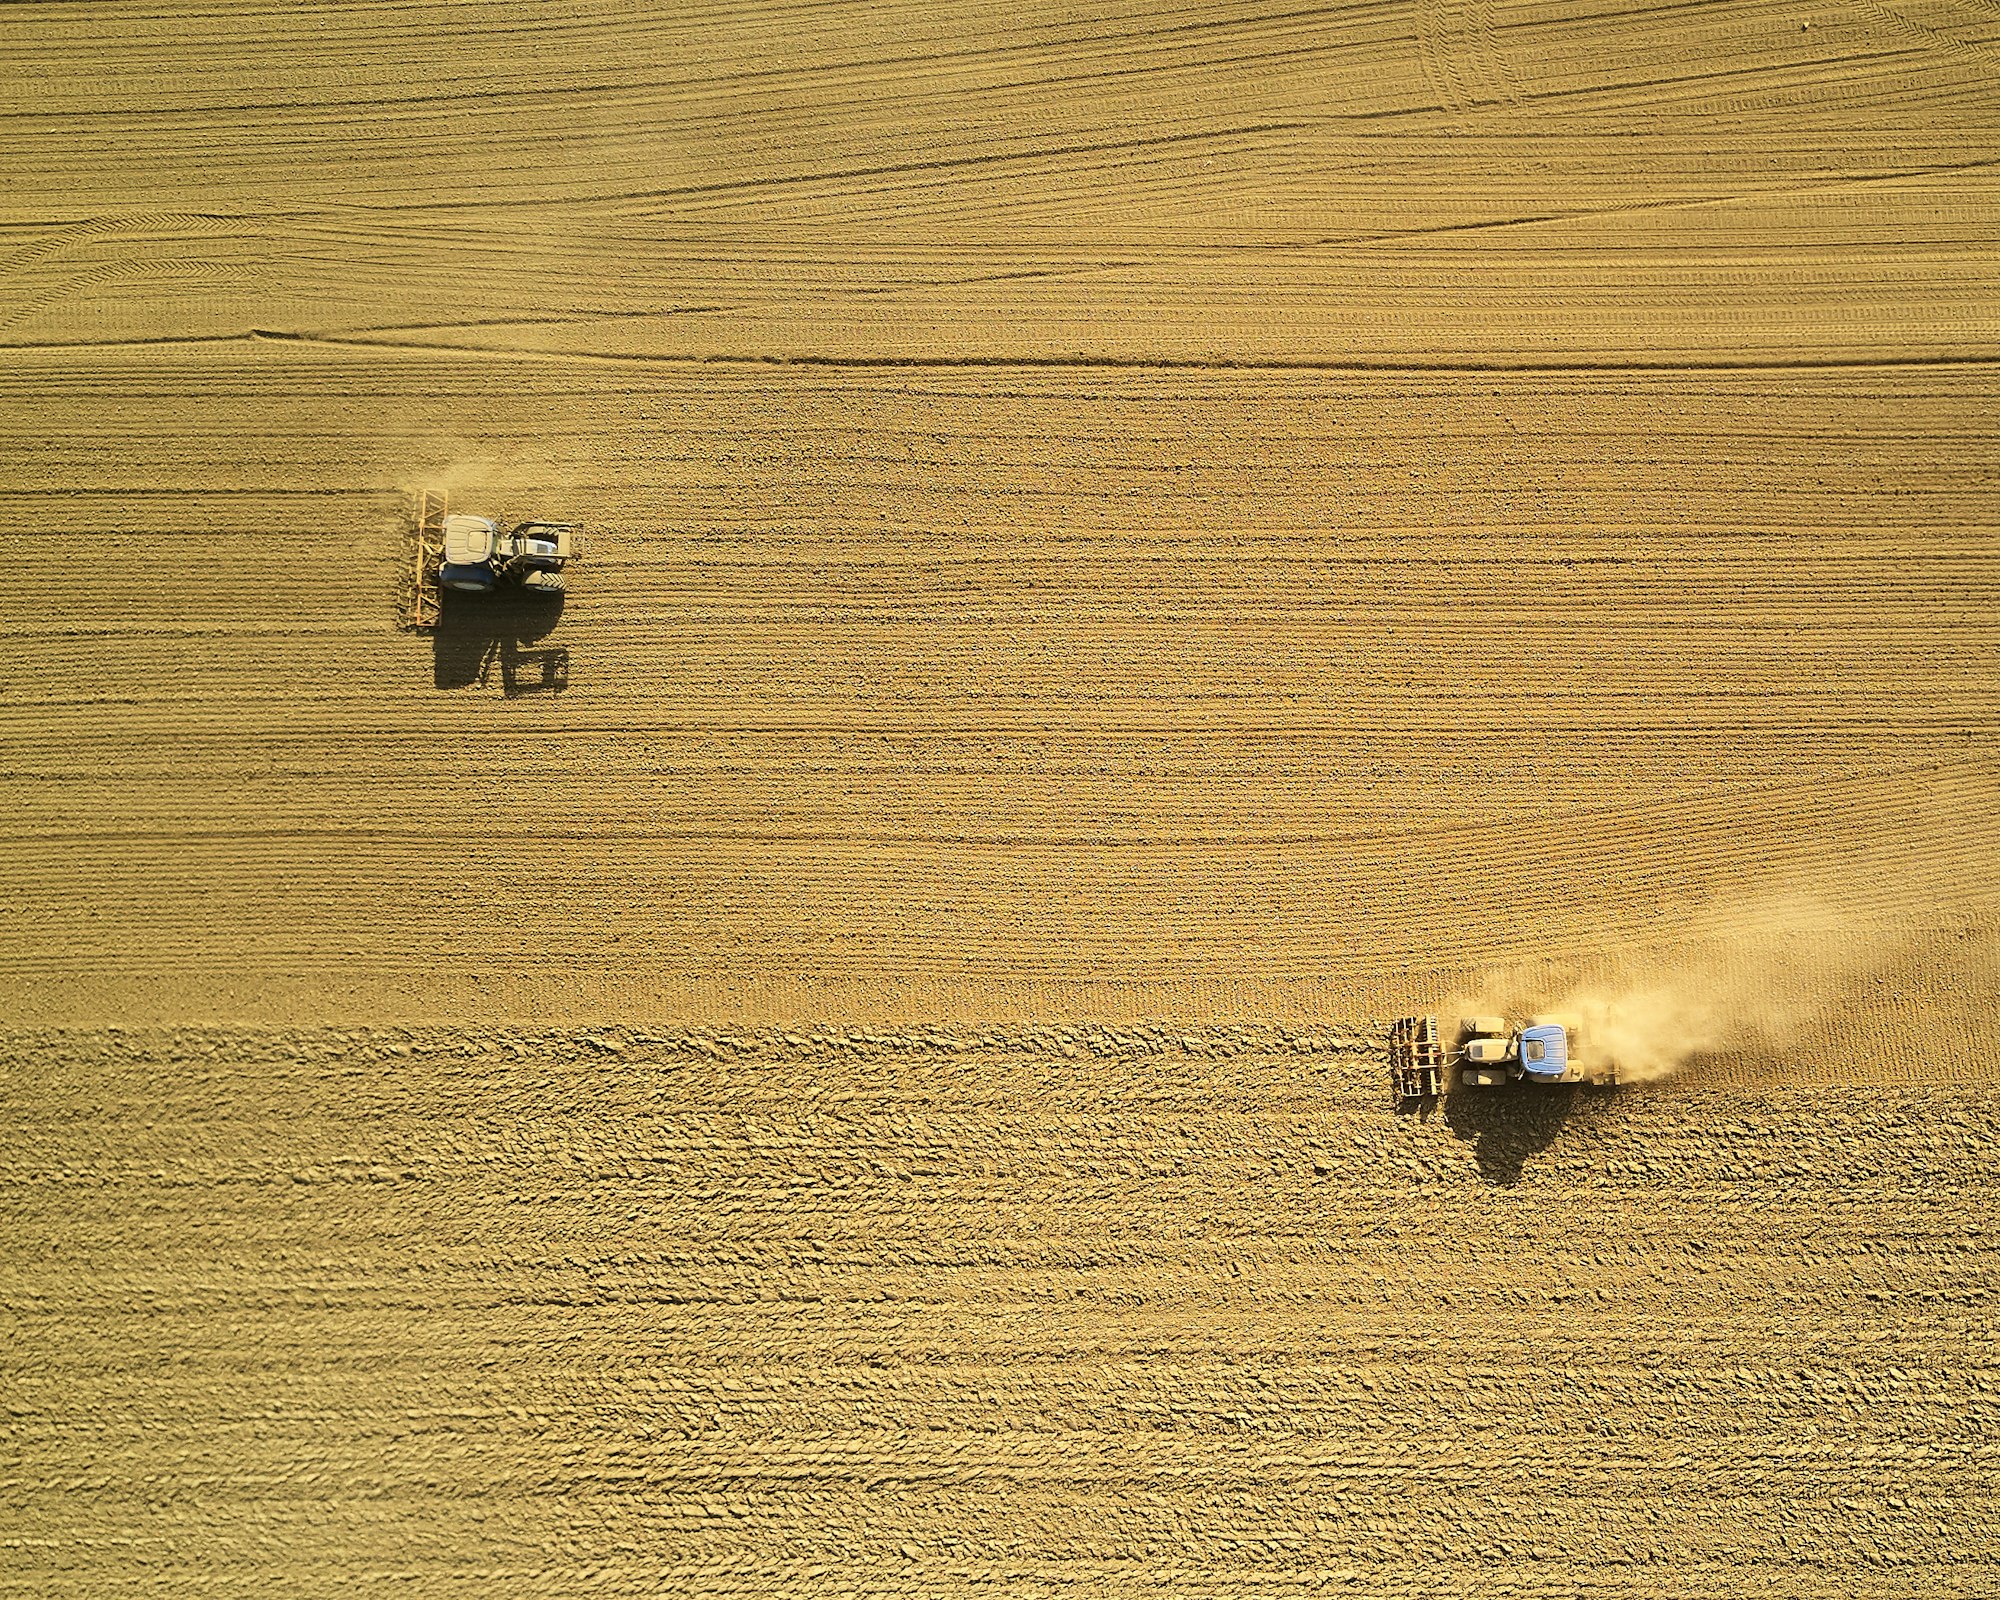 Big win for farmers: Israeli Agtech partnership forms to bring data-backed irrigation solution